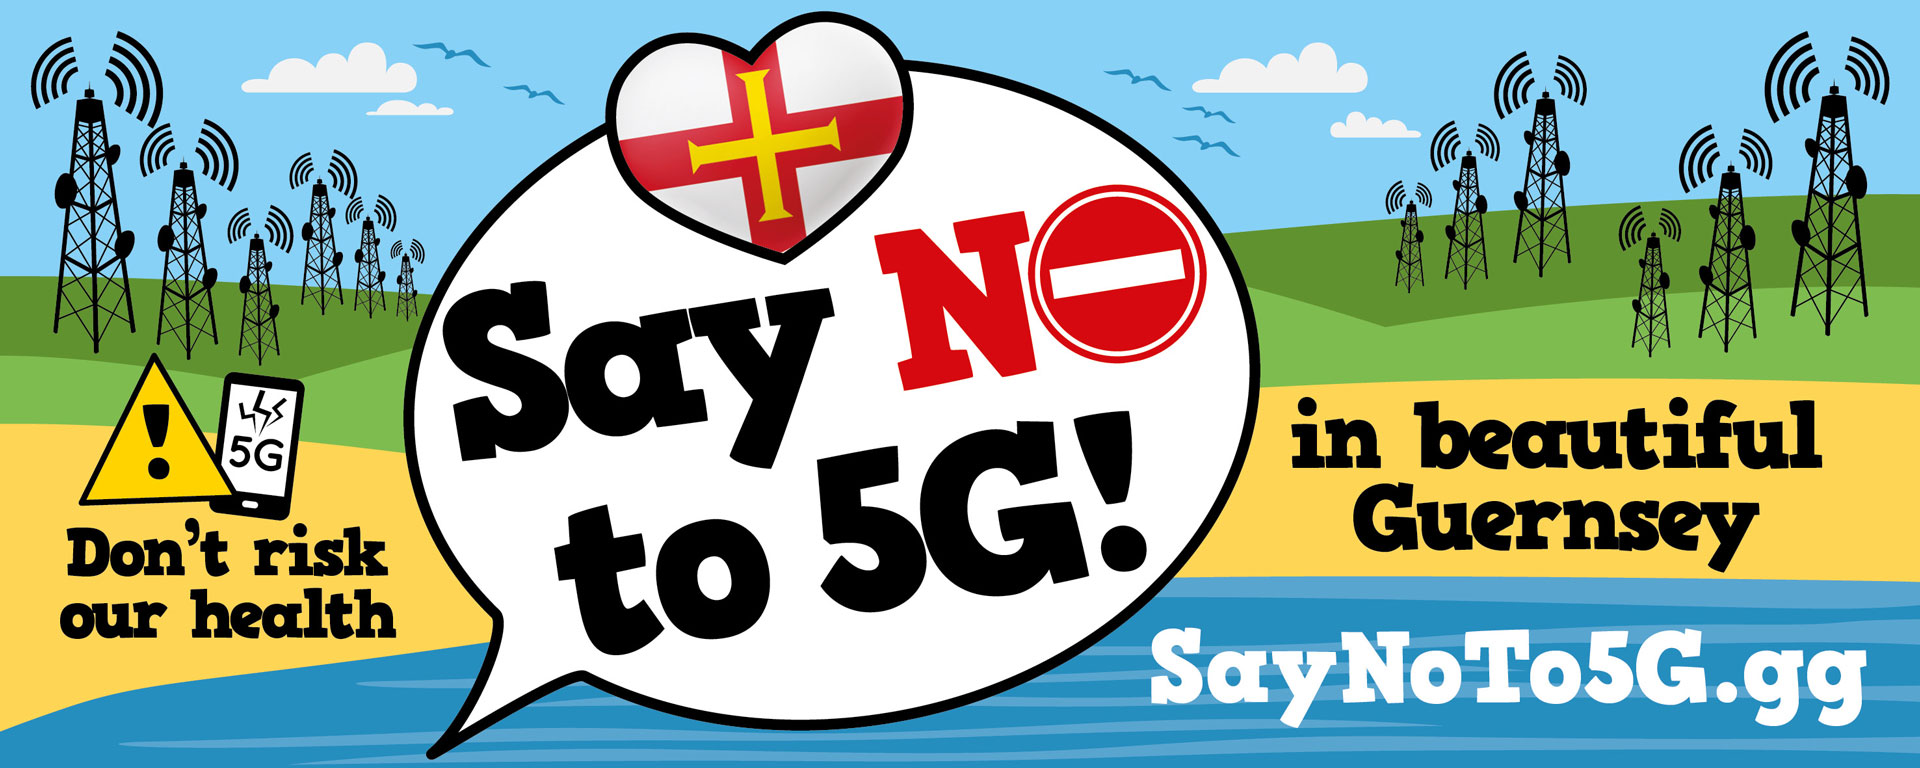 Home - Say No To 5G!